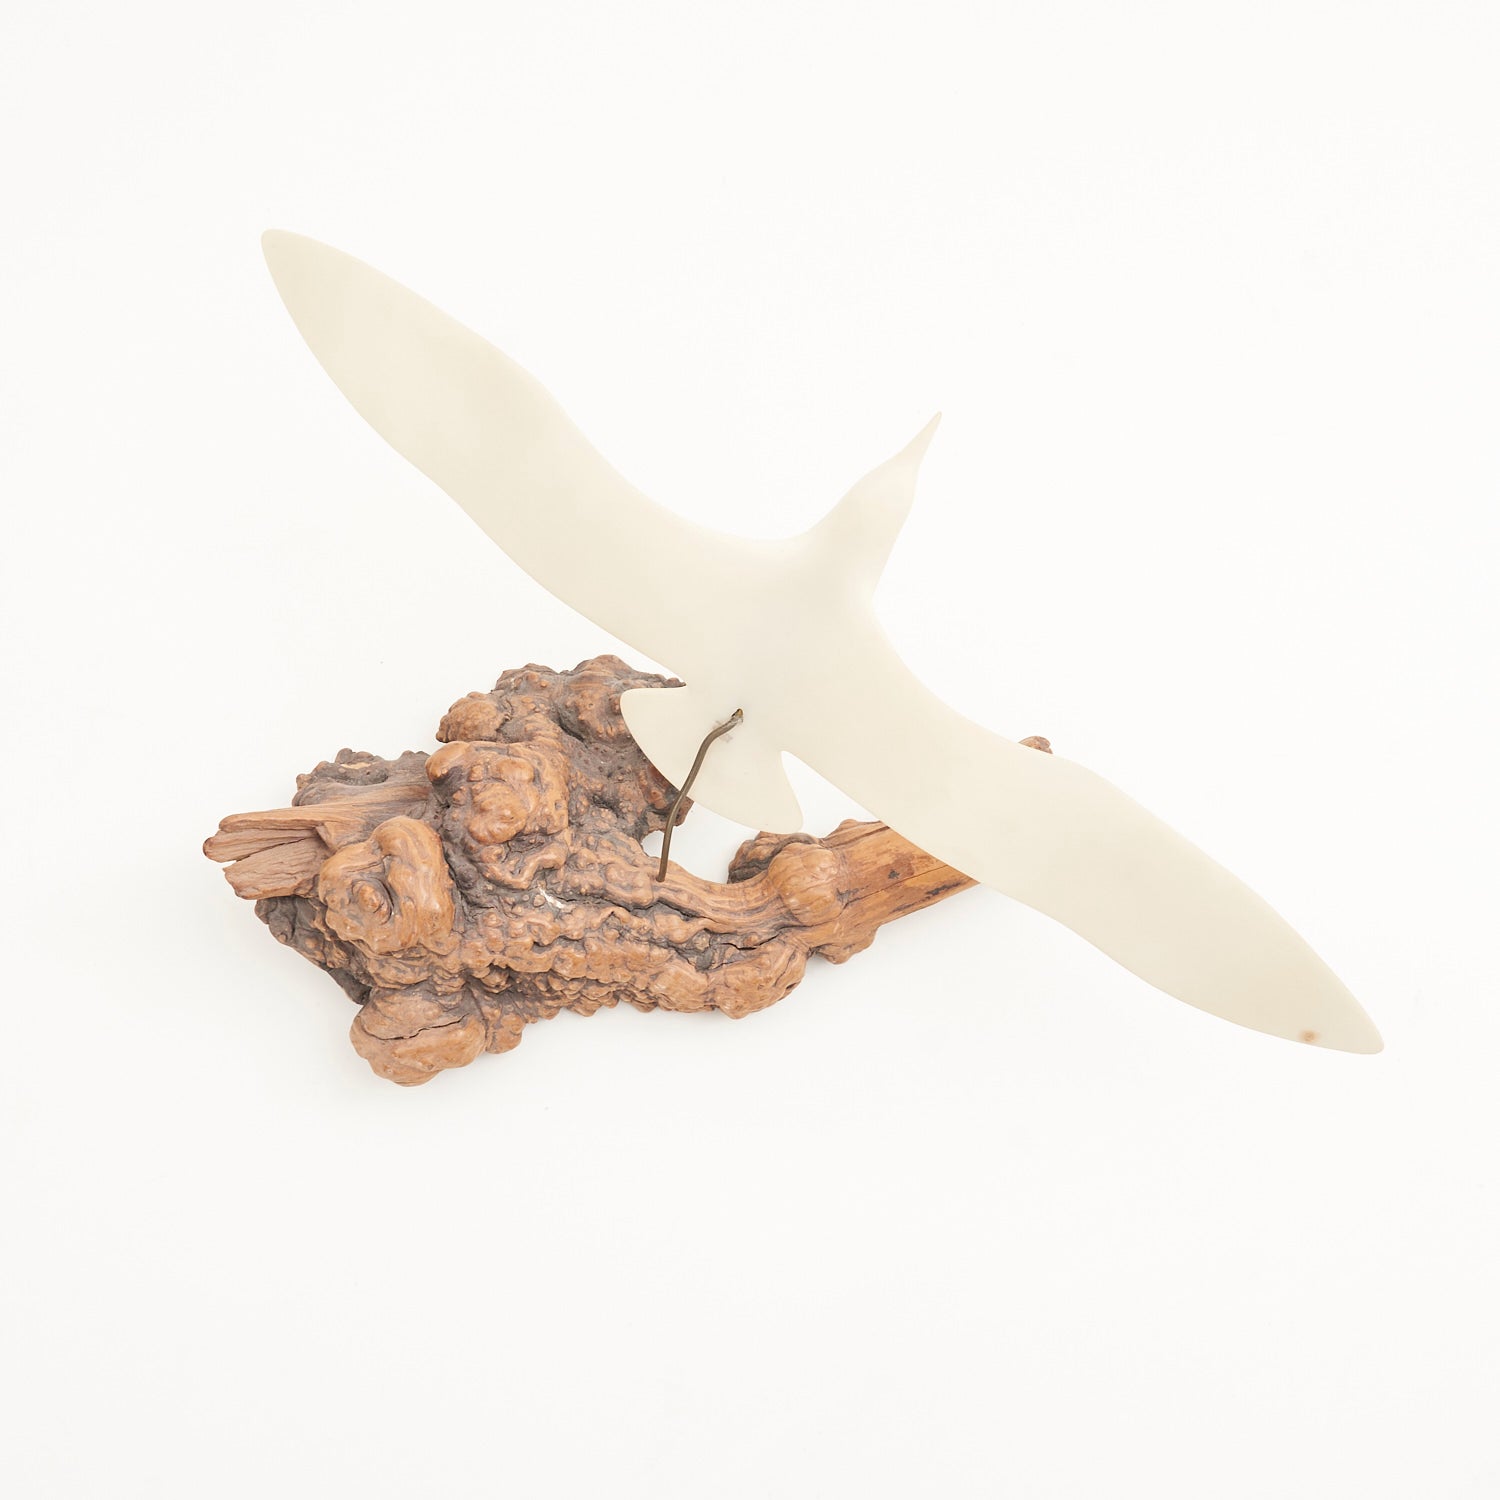 Resin Seagull on Burlwood Base by John Perry